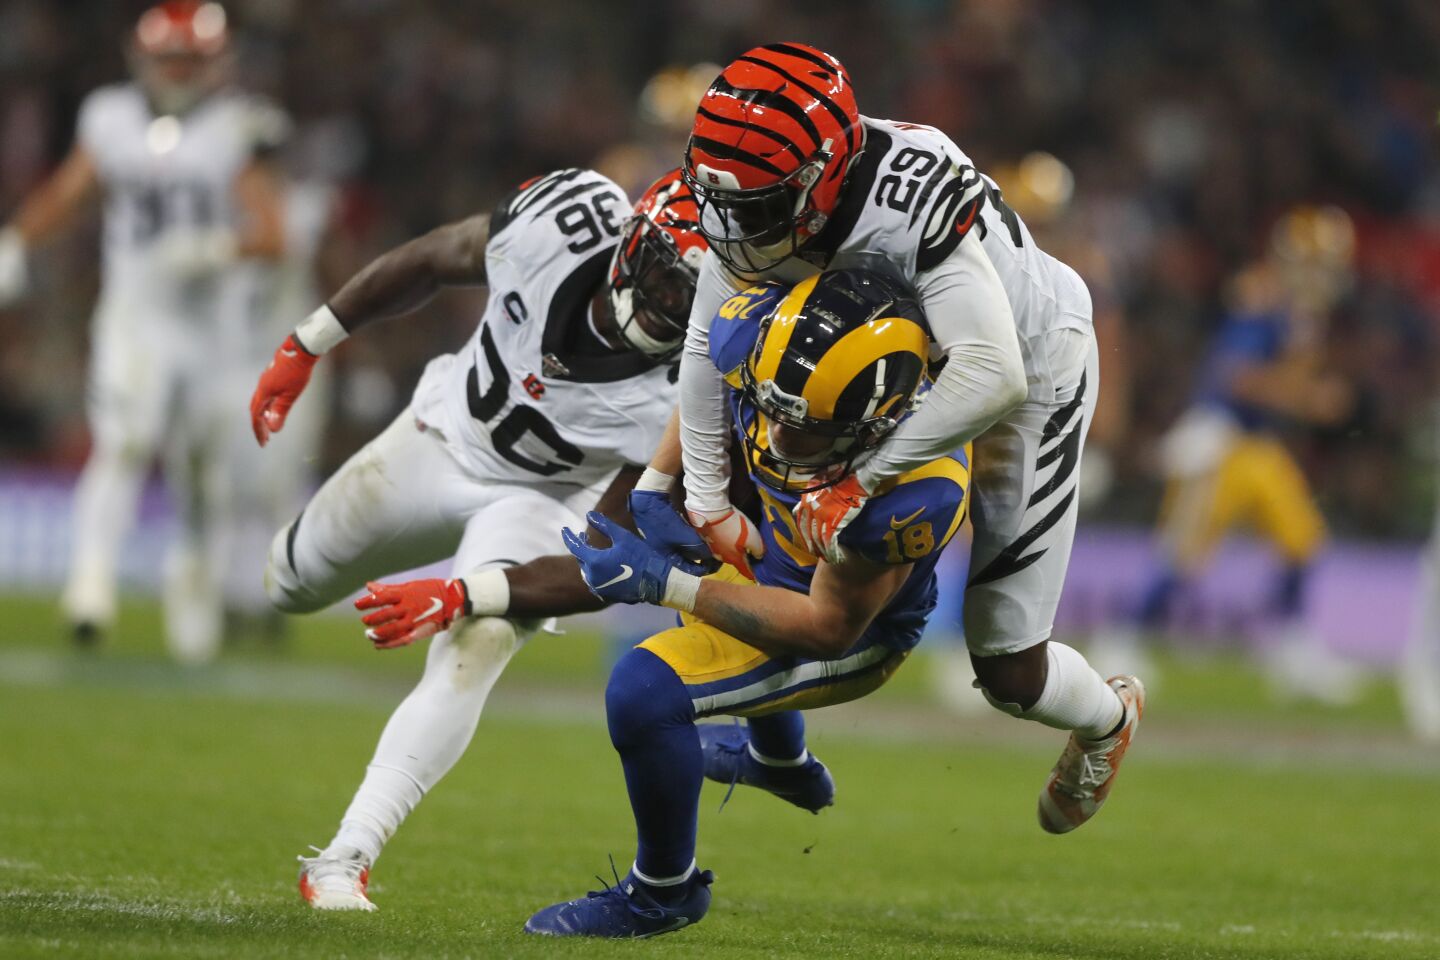 Rams wide receiver Cooper Kupp is tackled by Bengals cornerback Tony McRae (29) during the second half.